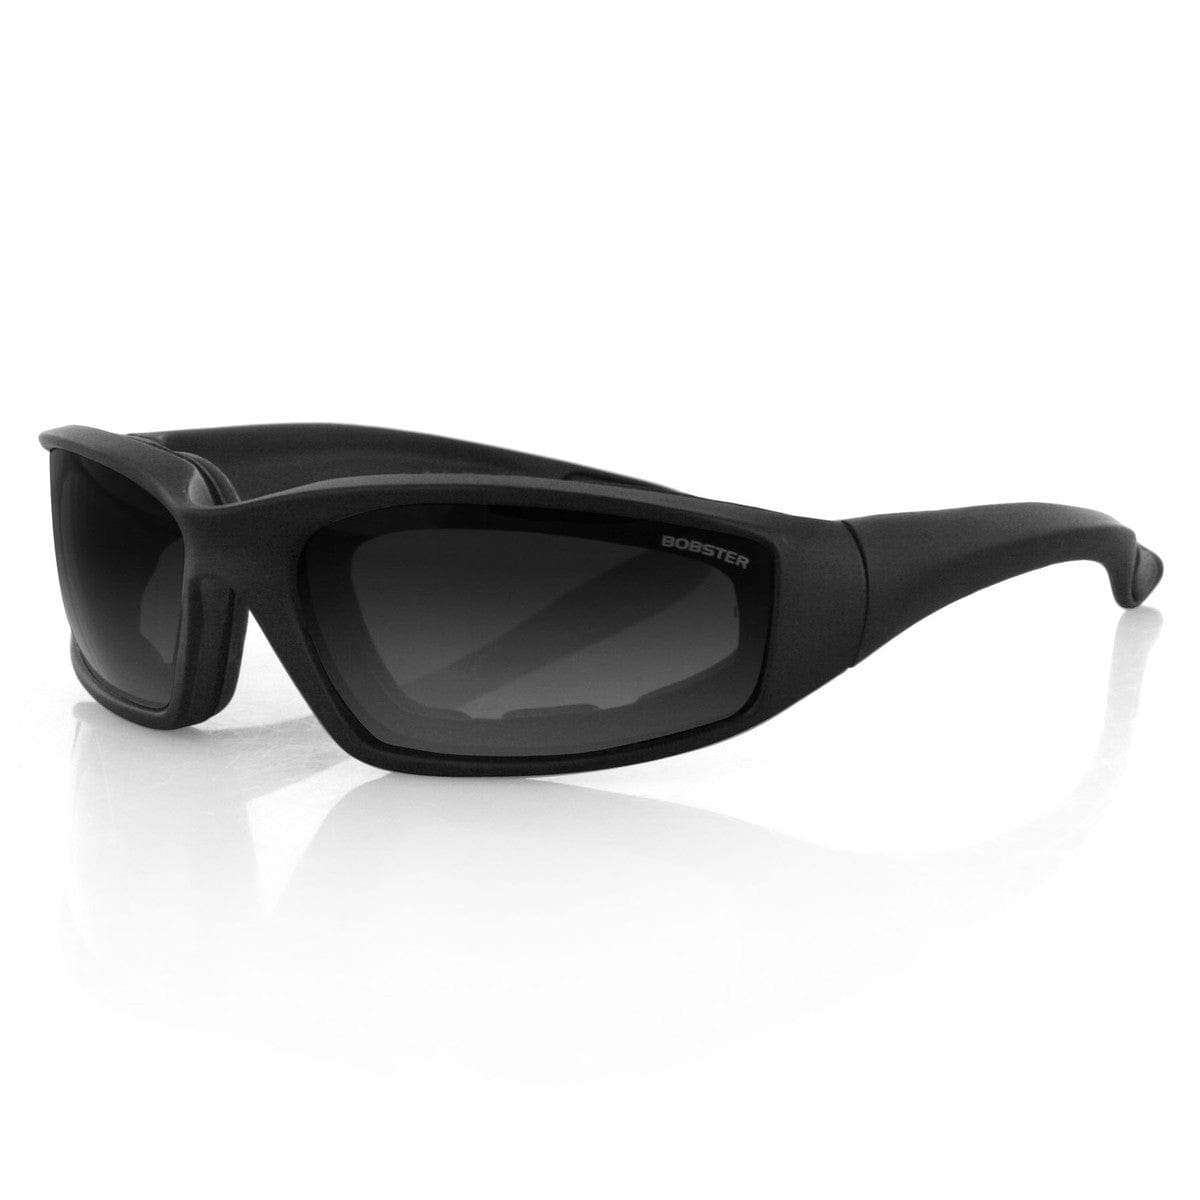 Bobster Foamerz 2 Safety Sunglasses with Black Frame and Anti-Fog Smoke Lens